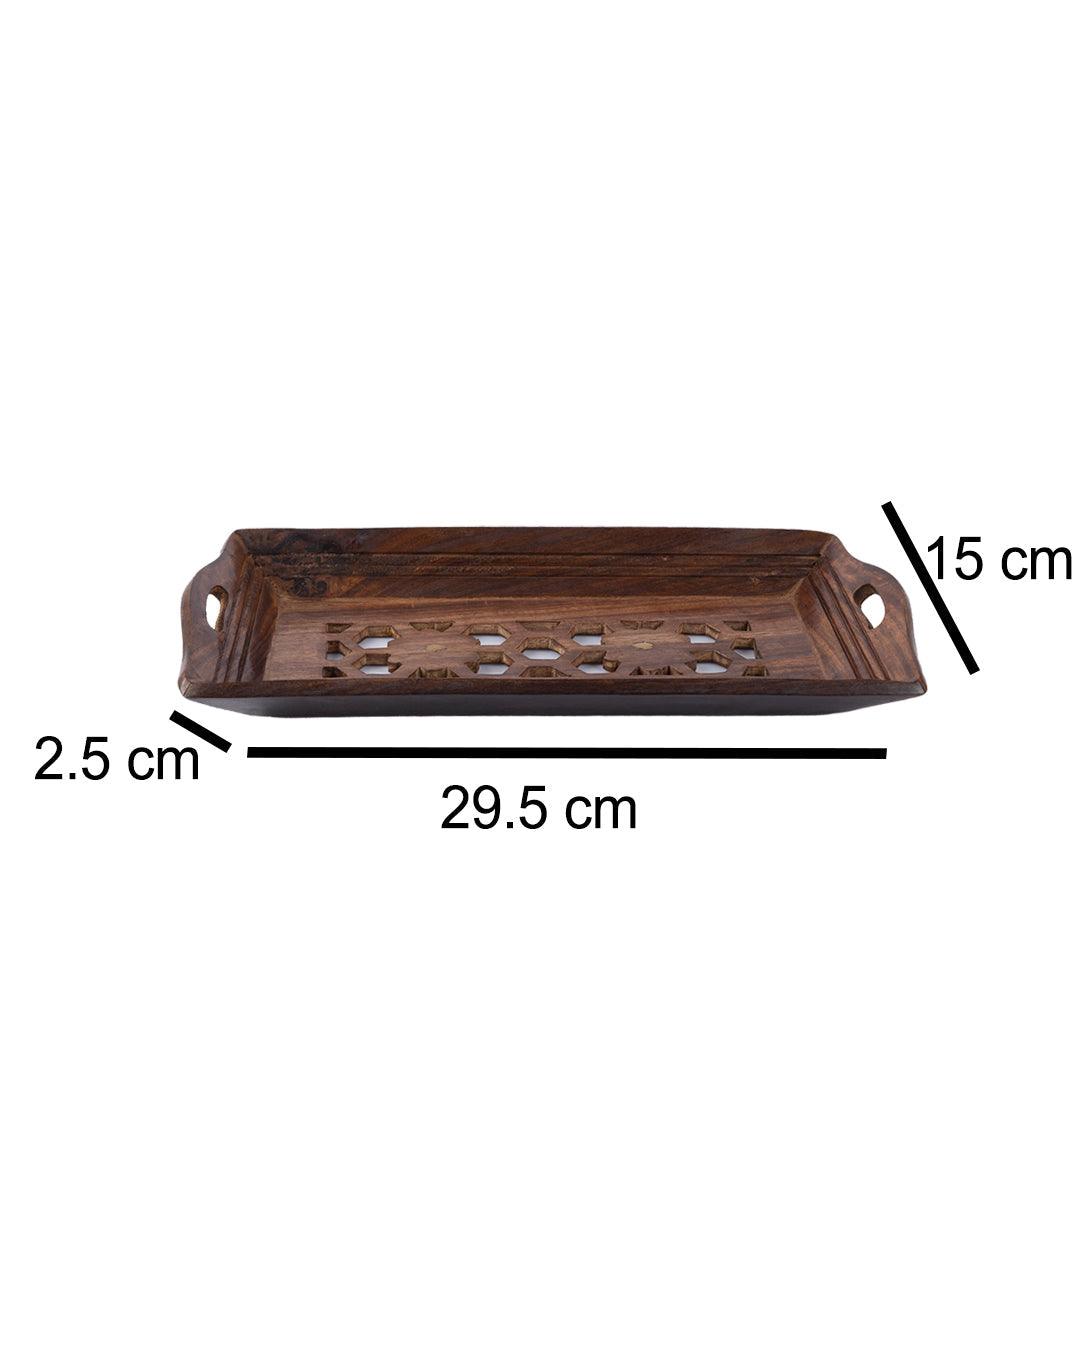 Sheesham Wood Handcrafts Coffee Serving Tray with Handles